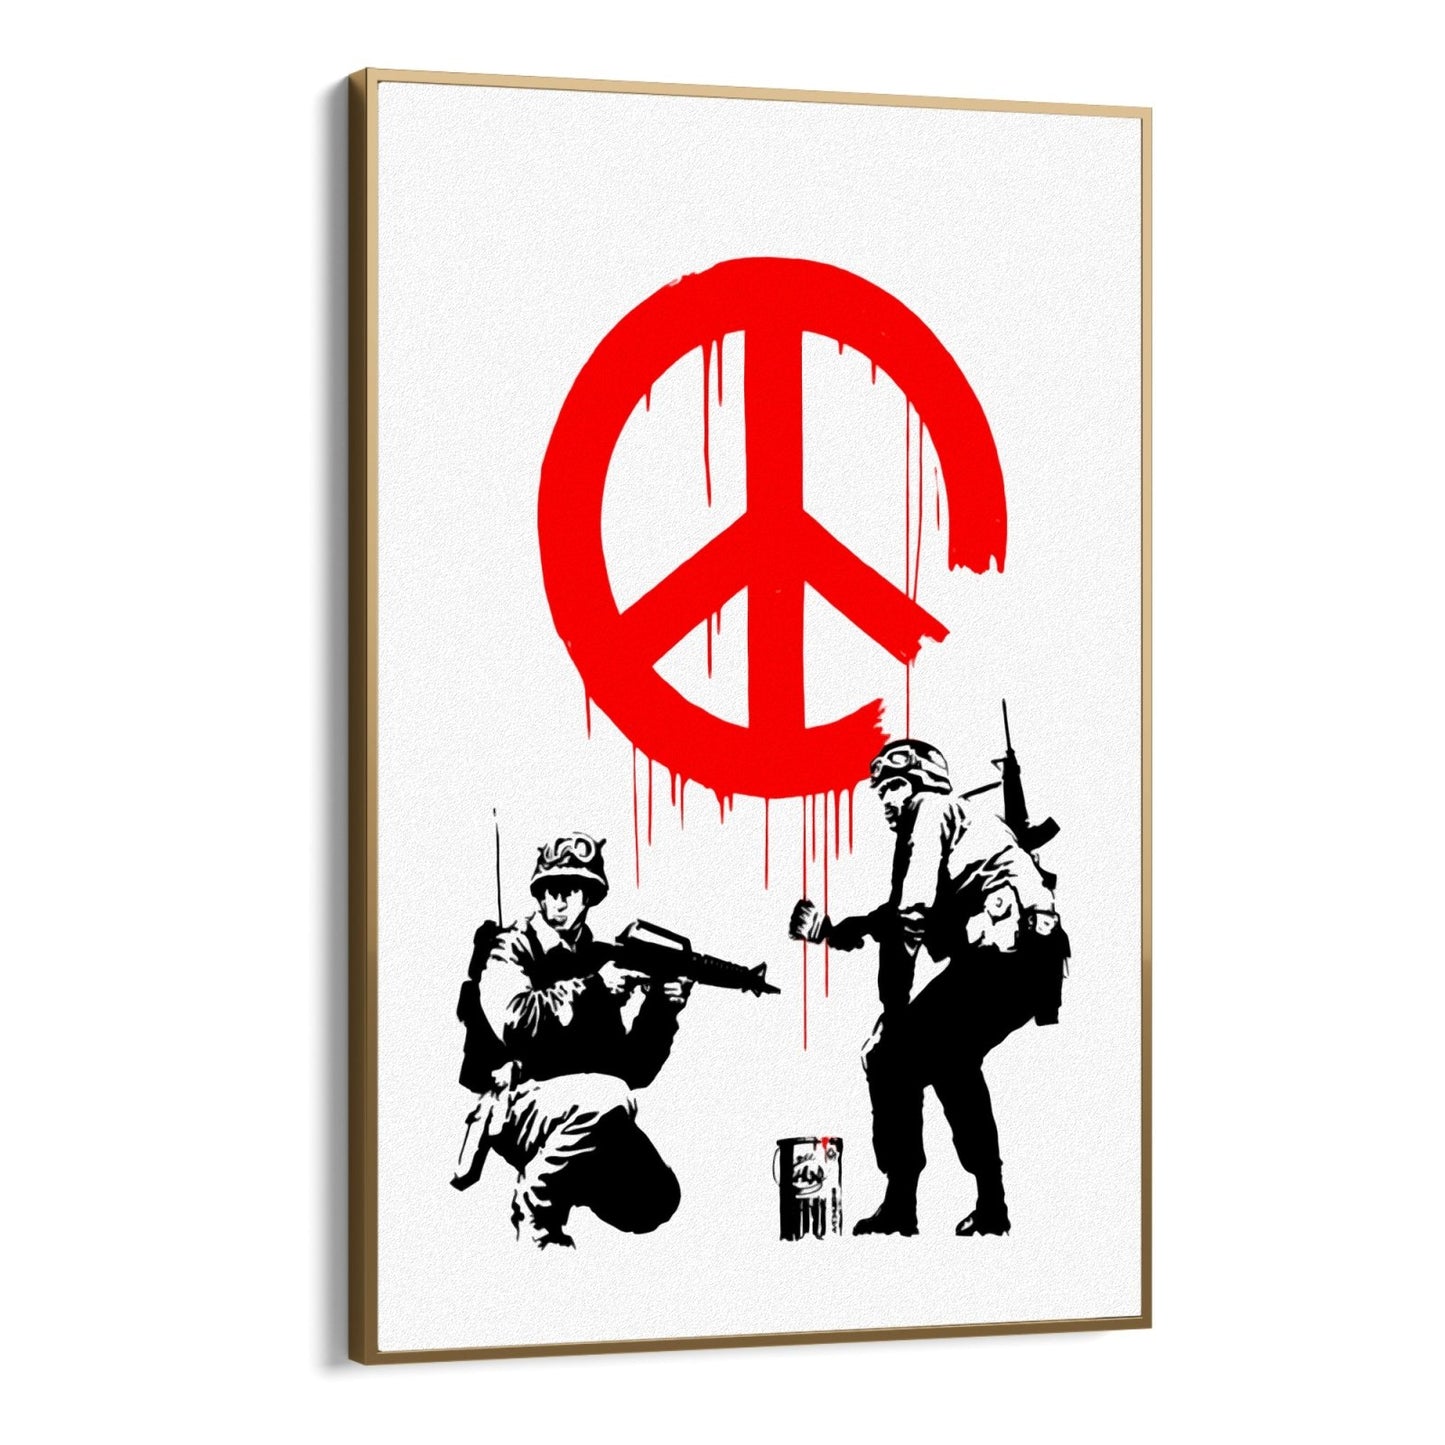 CND Soldiers, Banksy